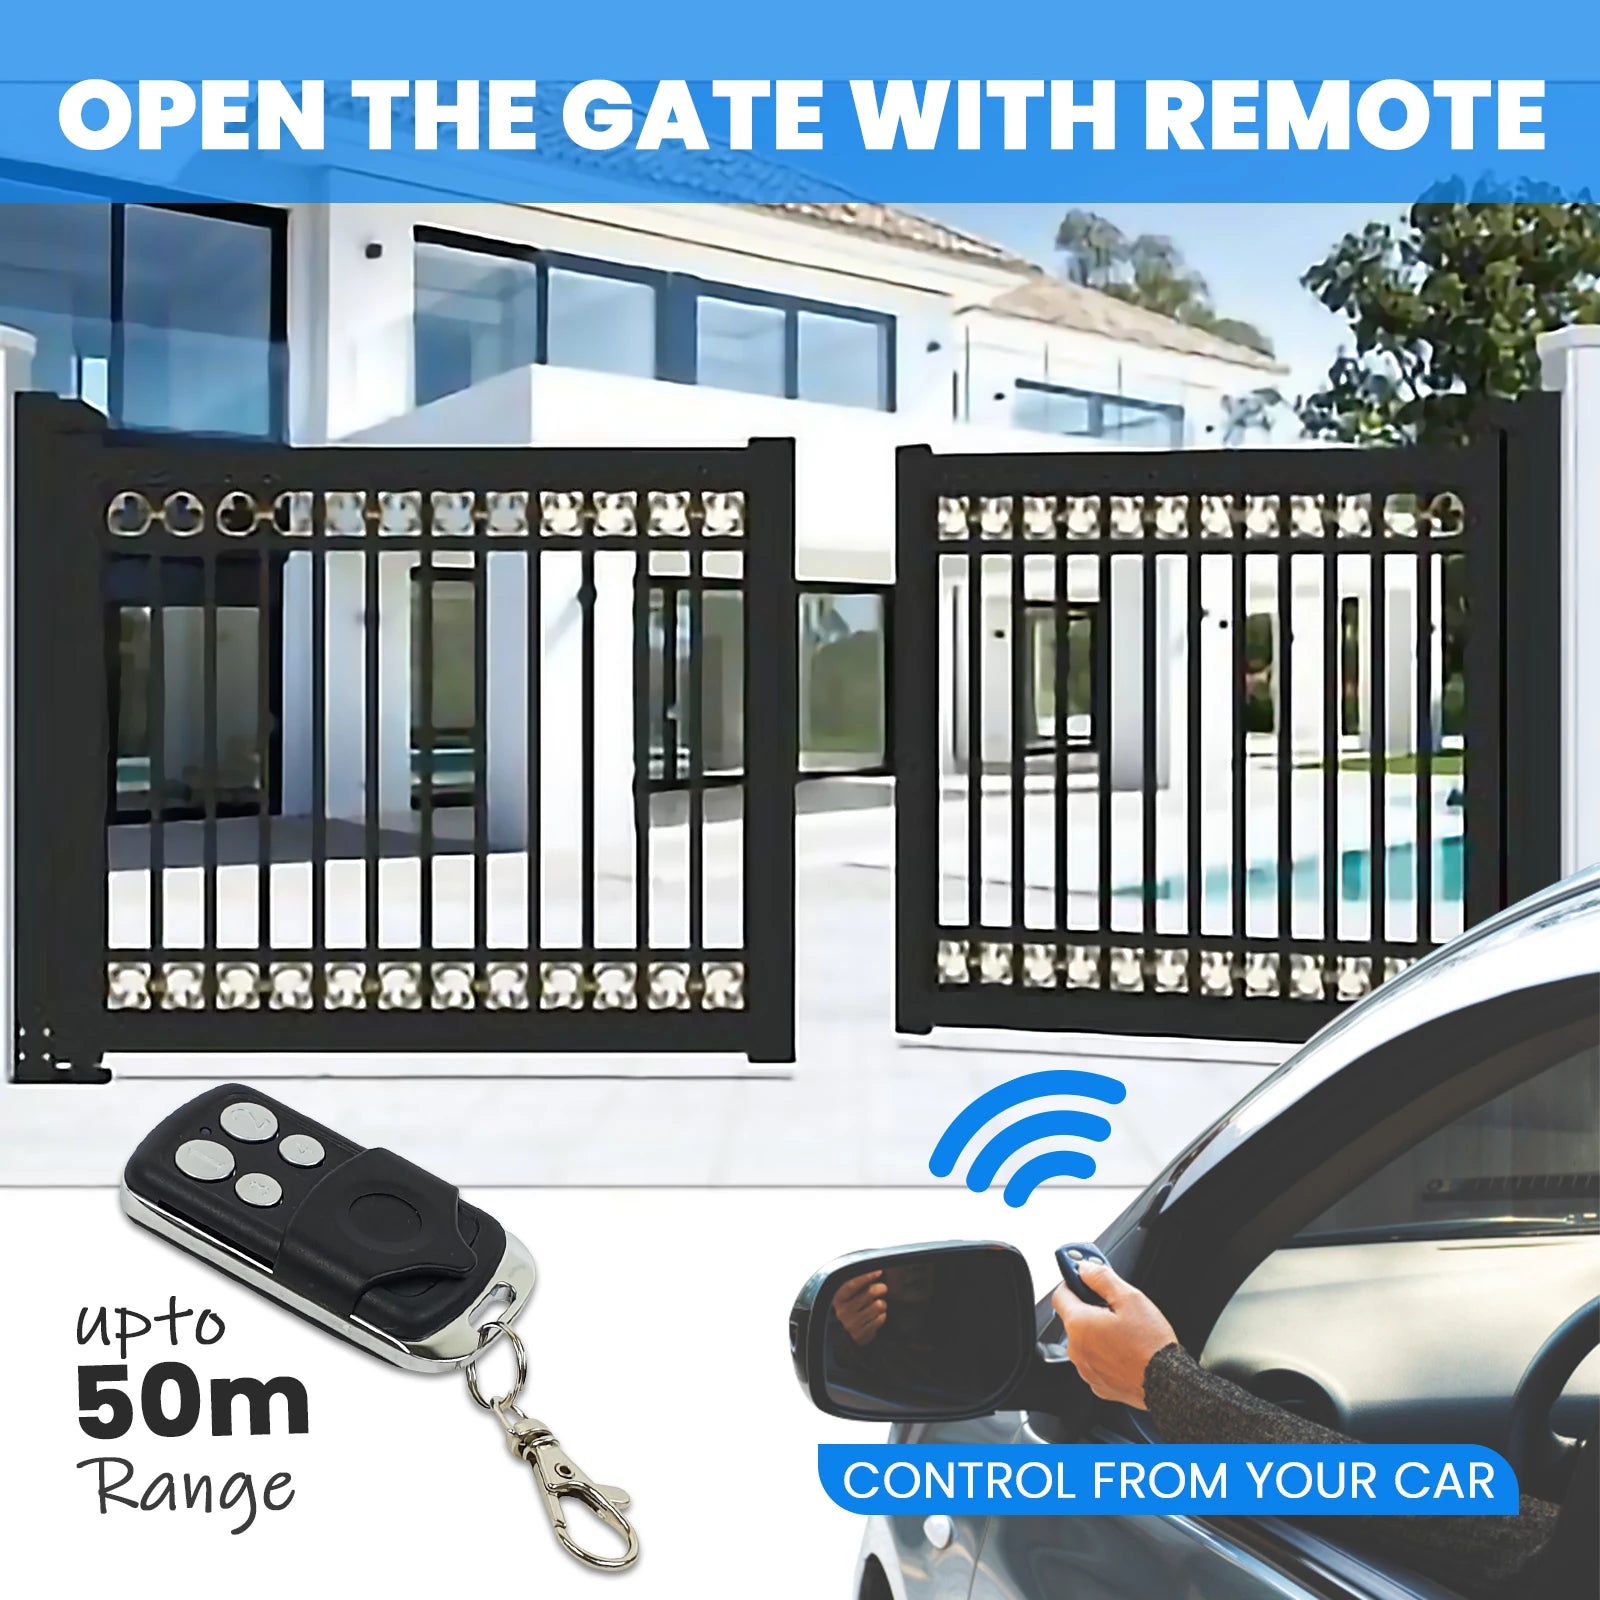 USB Receiver, & WiFi Phone App Included, Gatomate